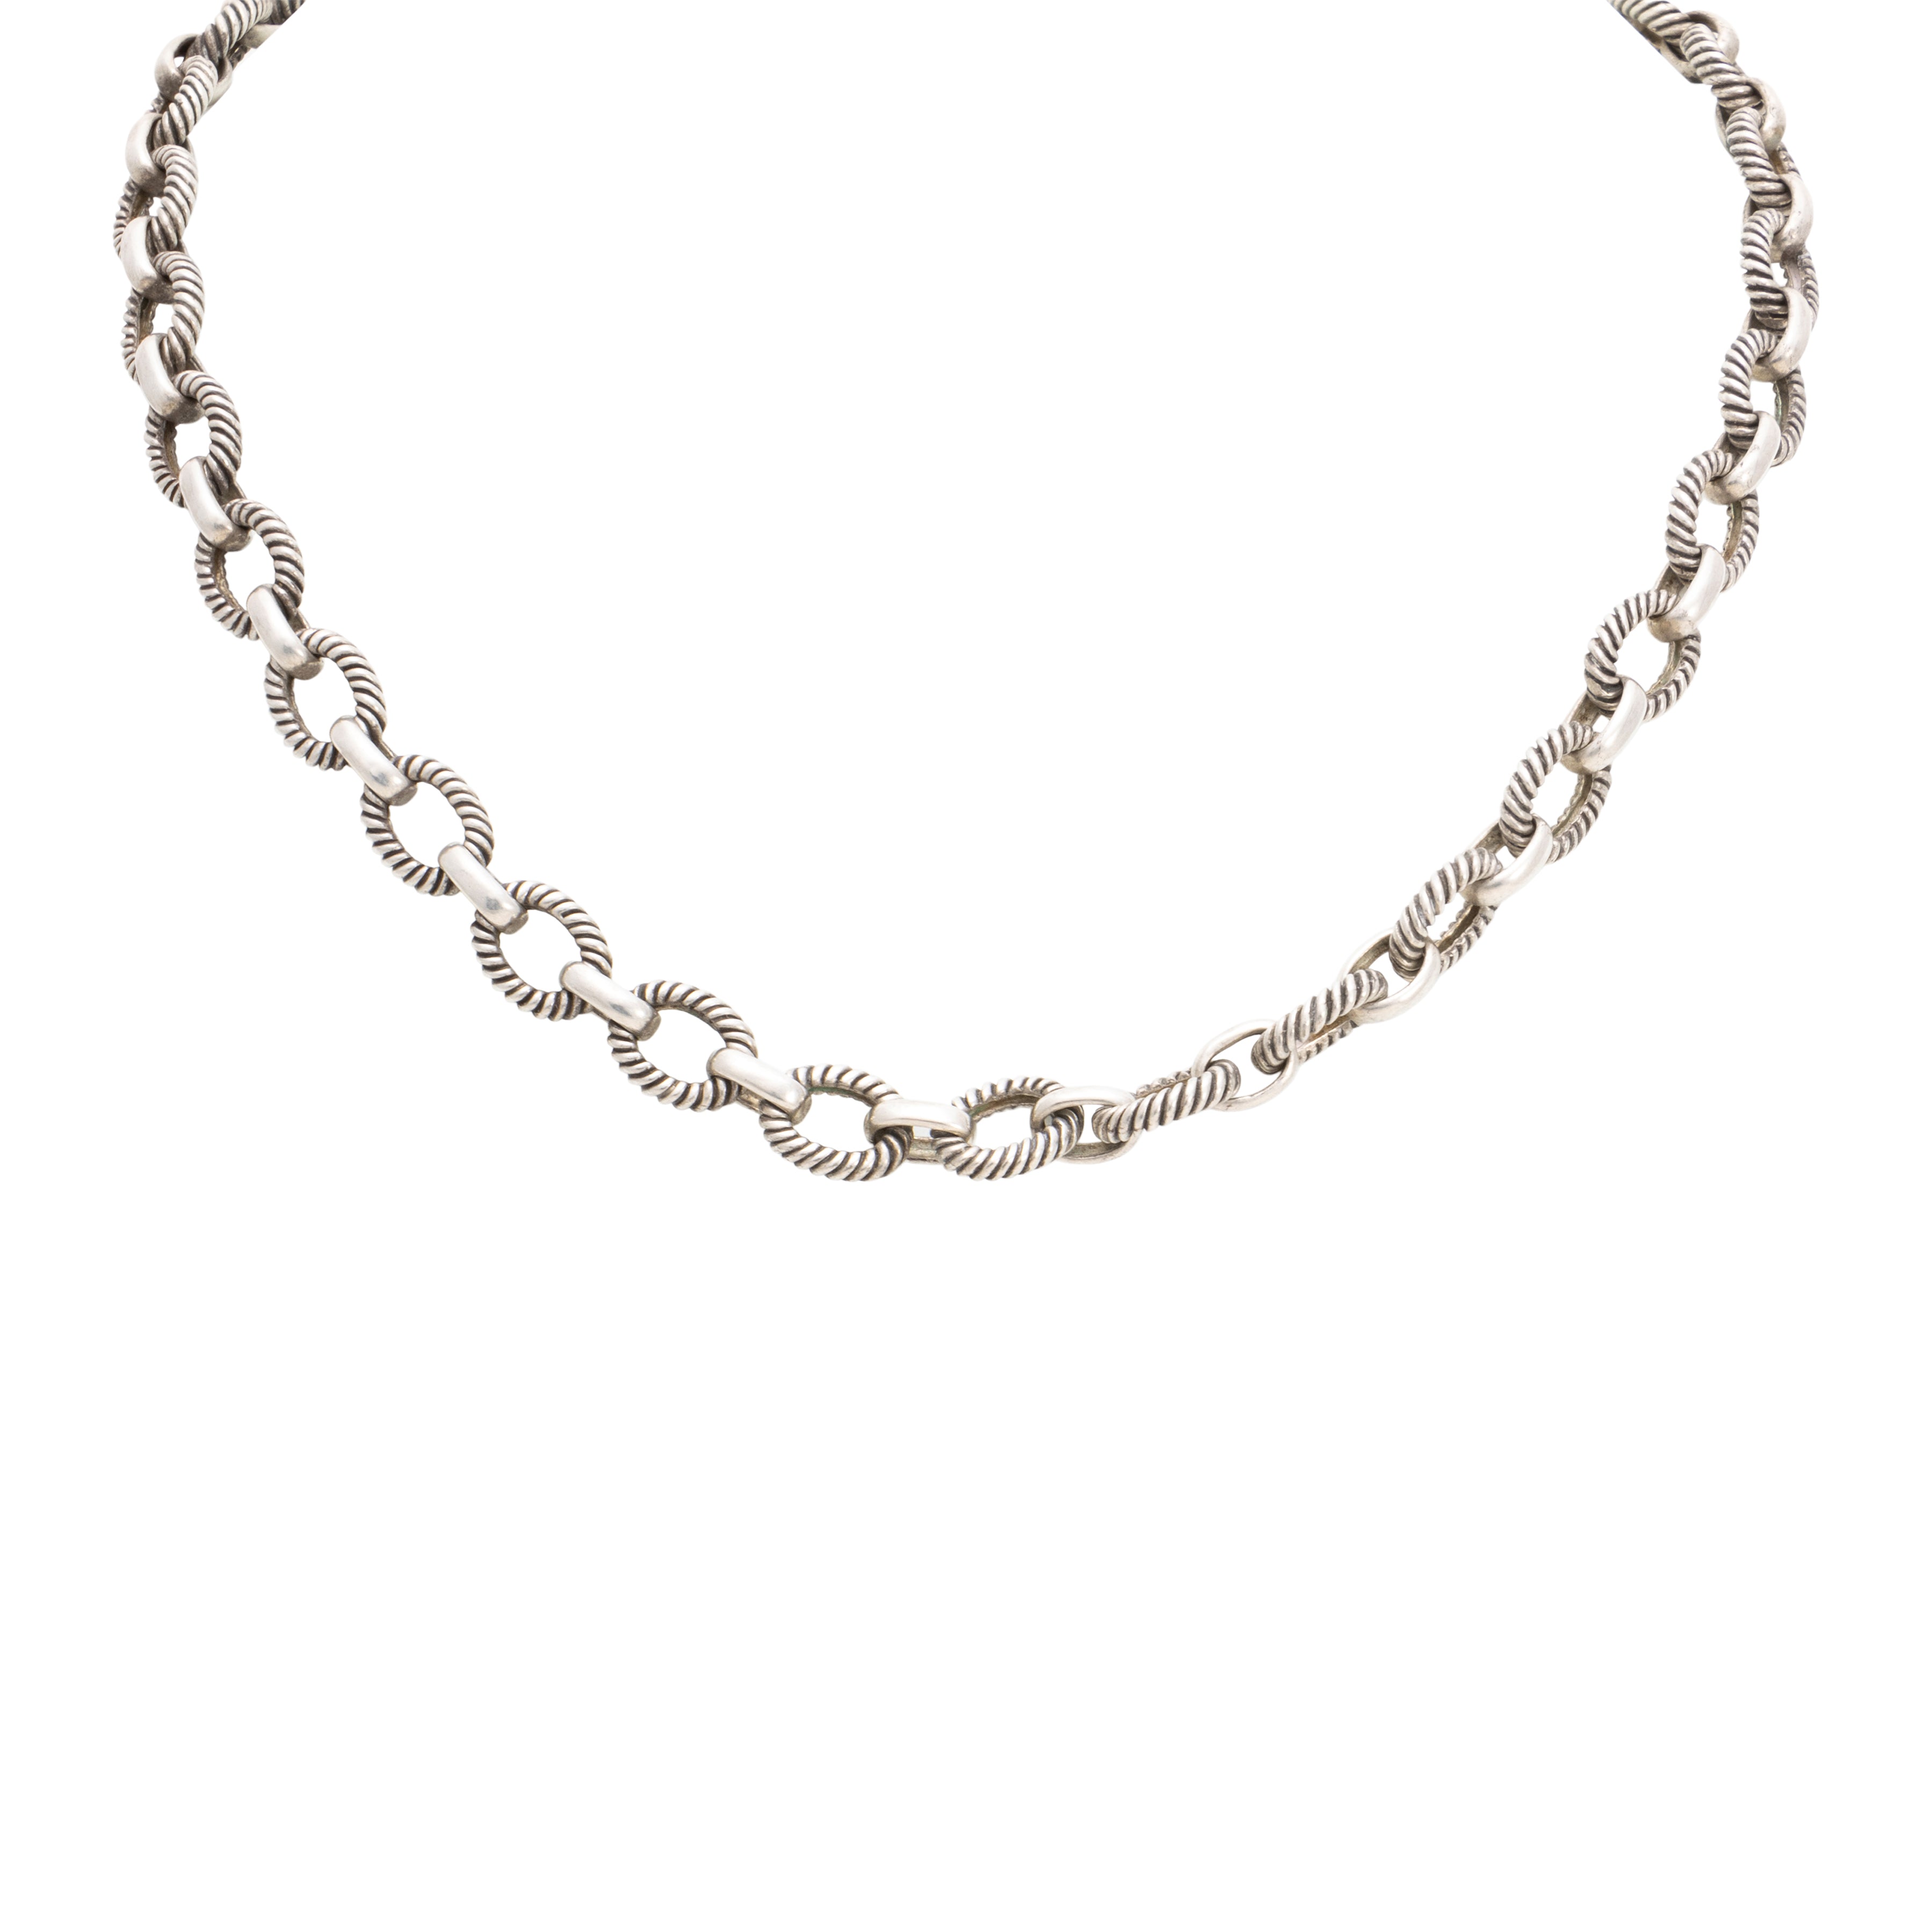 Sterling Link Chain, Jewelry, Necklace, Native